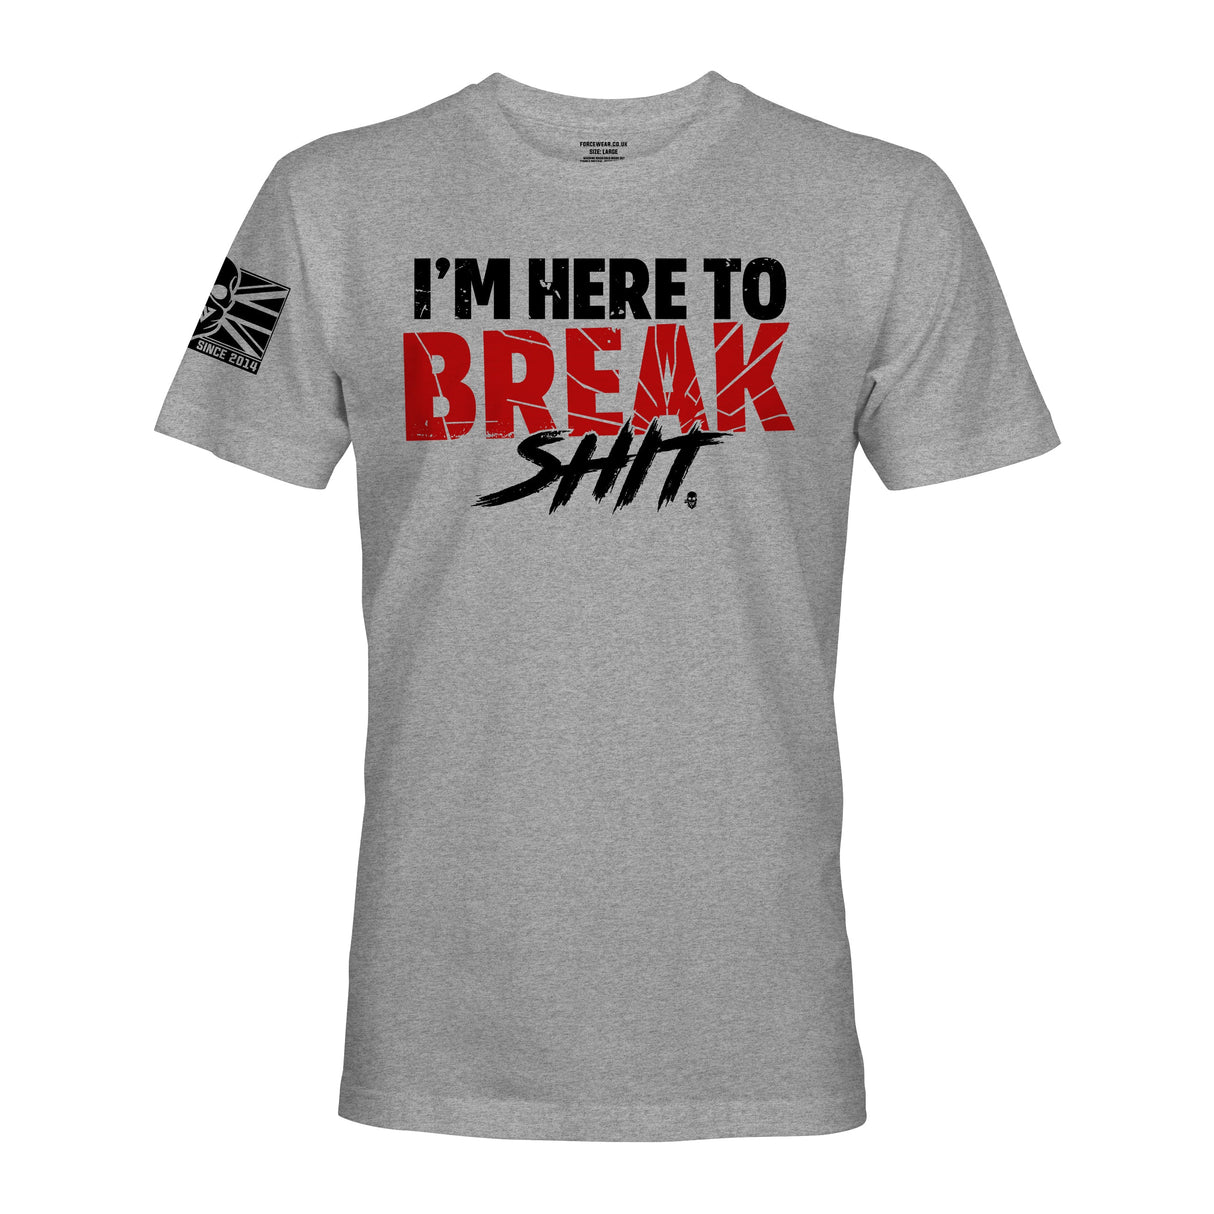 I'M HERE TO BREAK SHIT - Force Wear HQ - T-SHIRTS